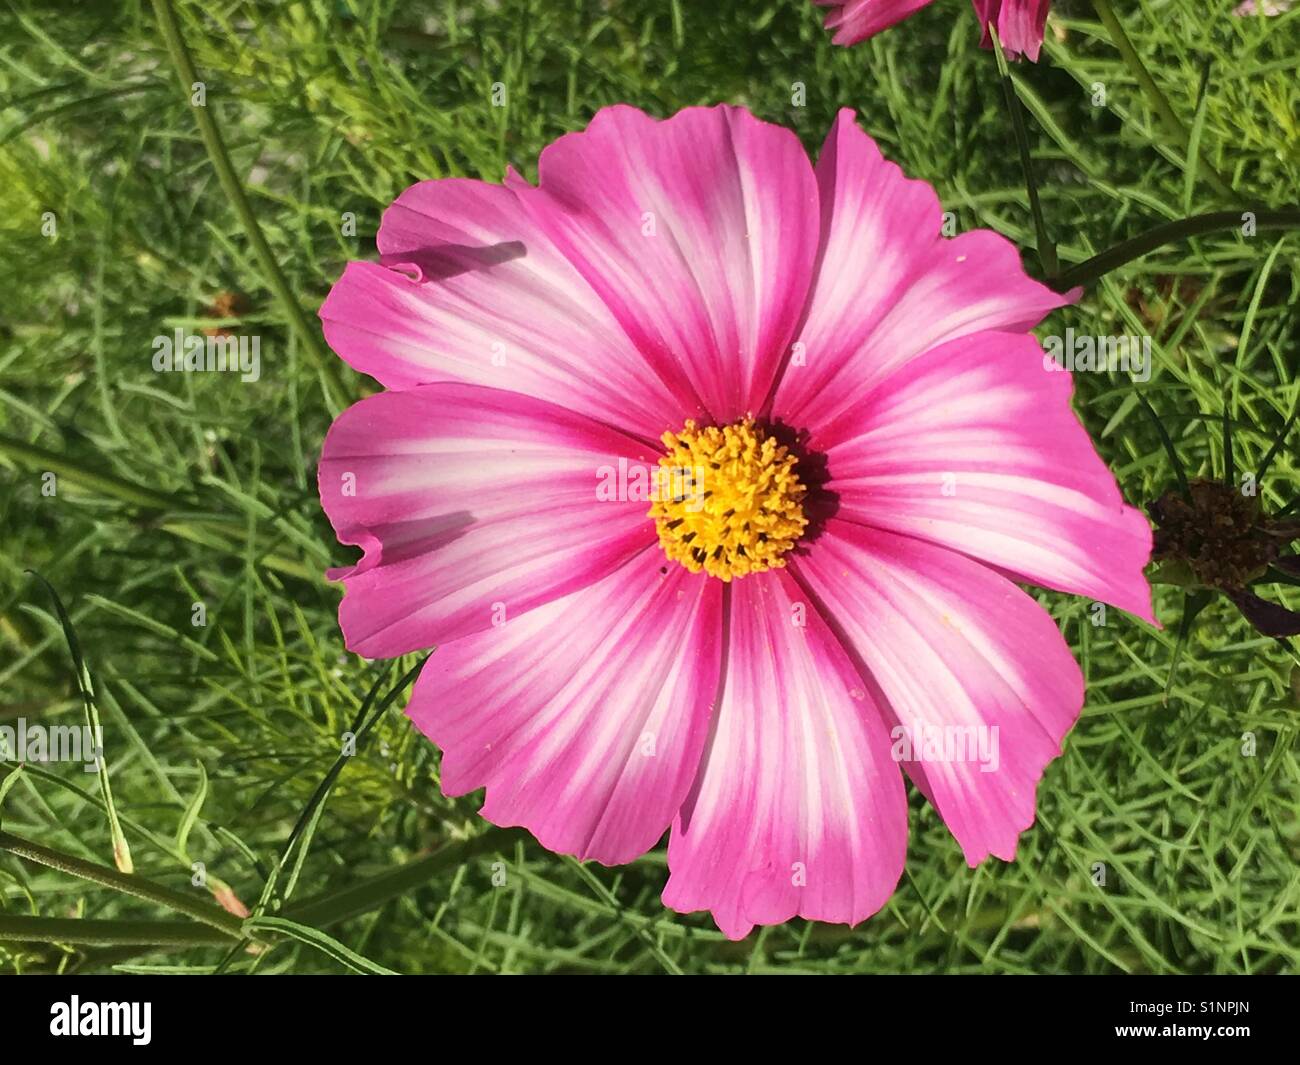 Pink daisy in the garden Stock Photo